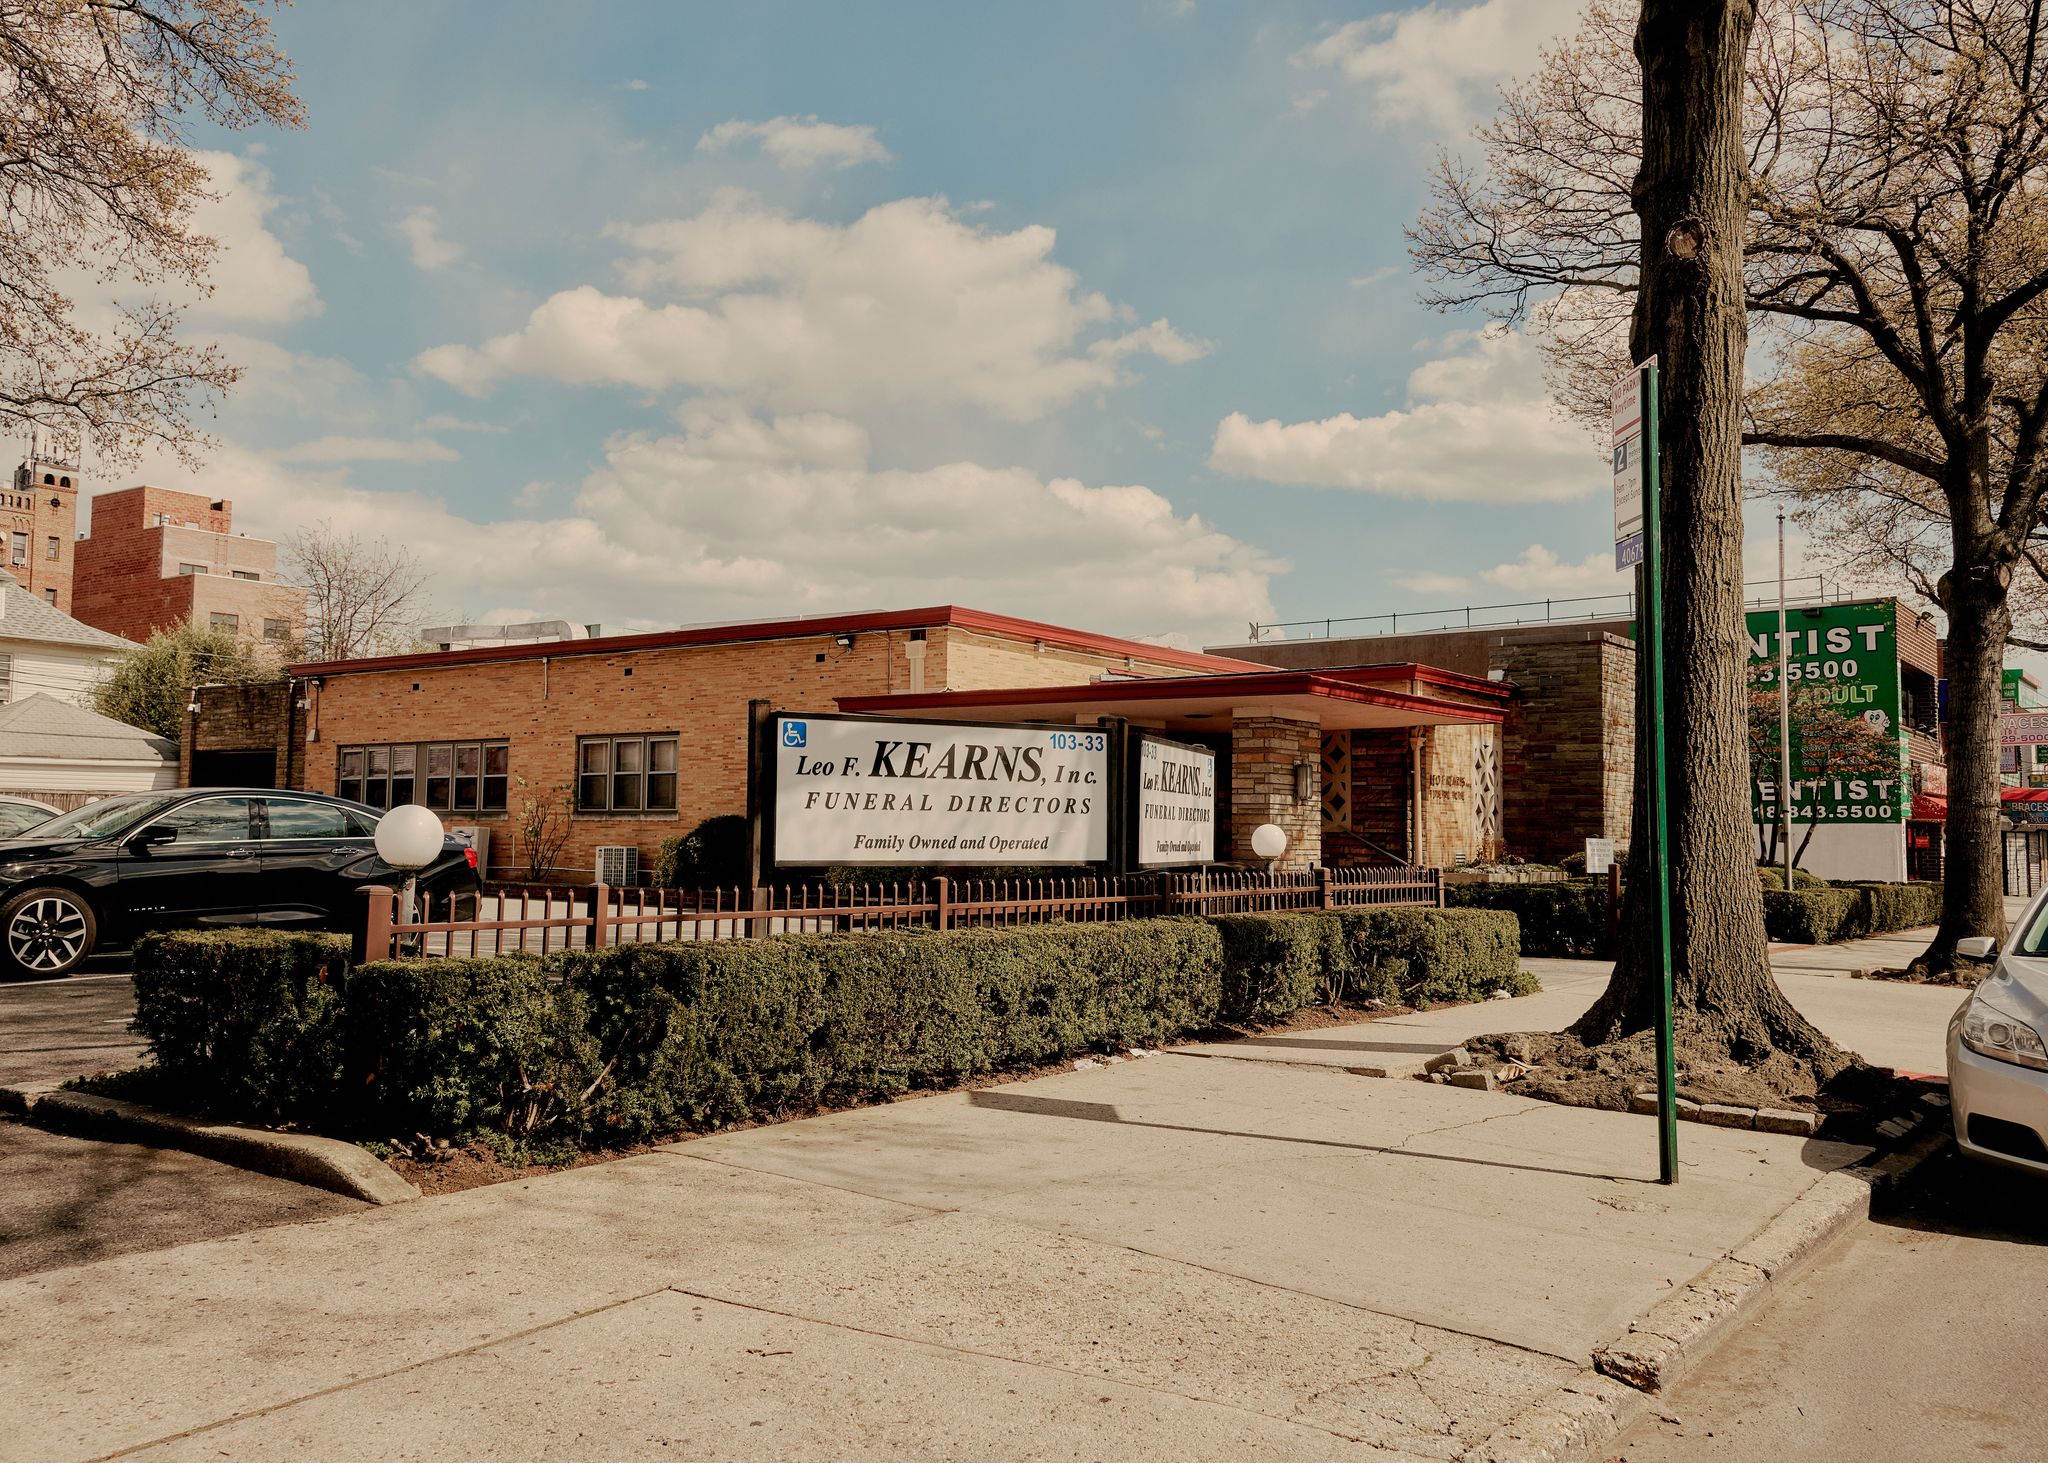 leo f kearns inc funeral homes in south richmond hill queens, ny photographed in april 2020 during covid 19